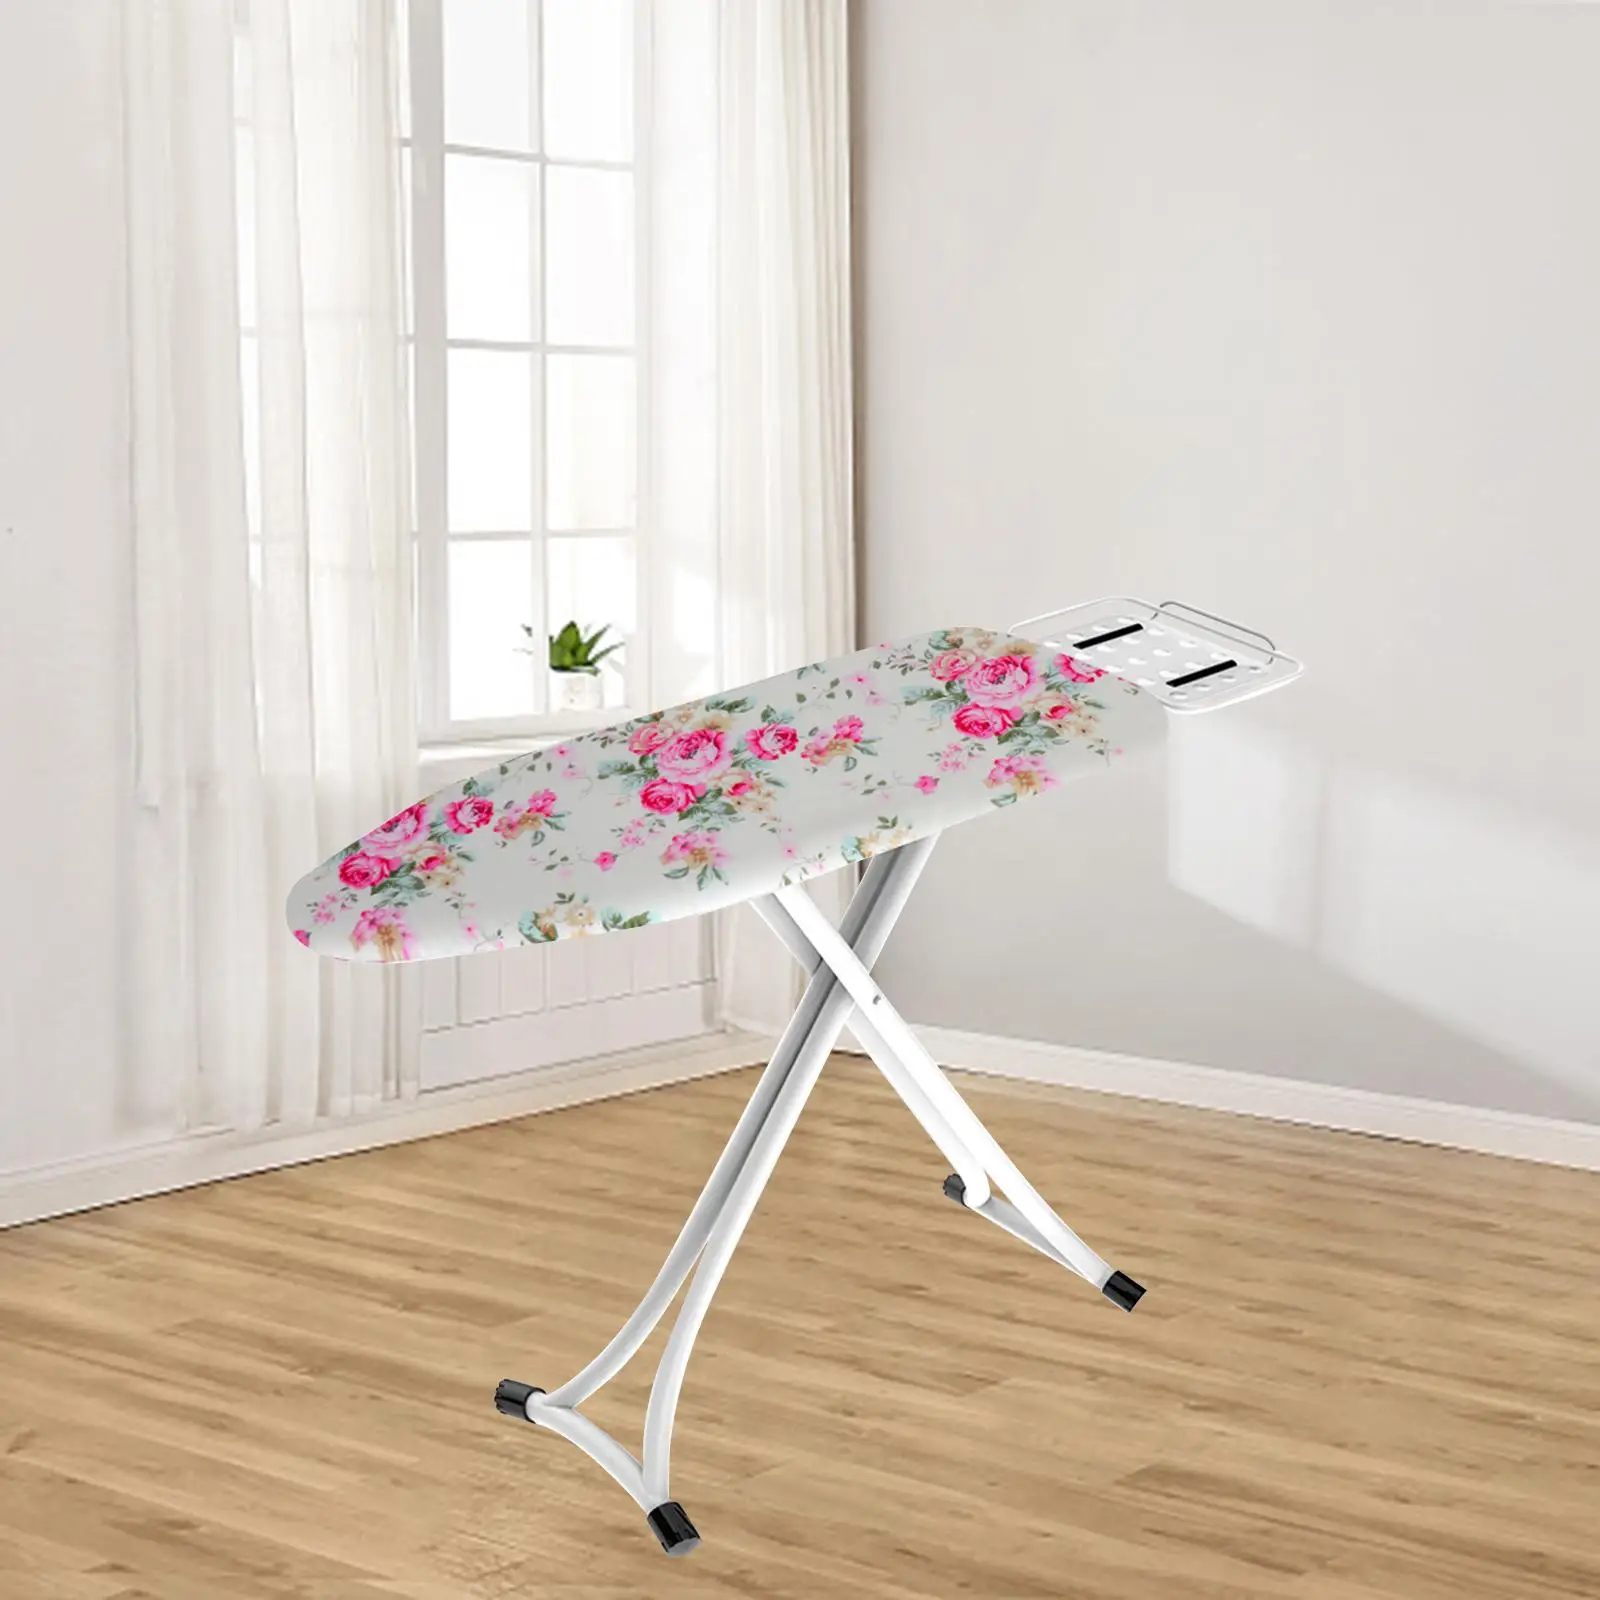 Elastic Ironing Board Padded Cover Resists Scorching Stain Resistant 120Cmx41cm